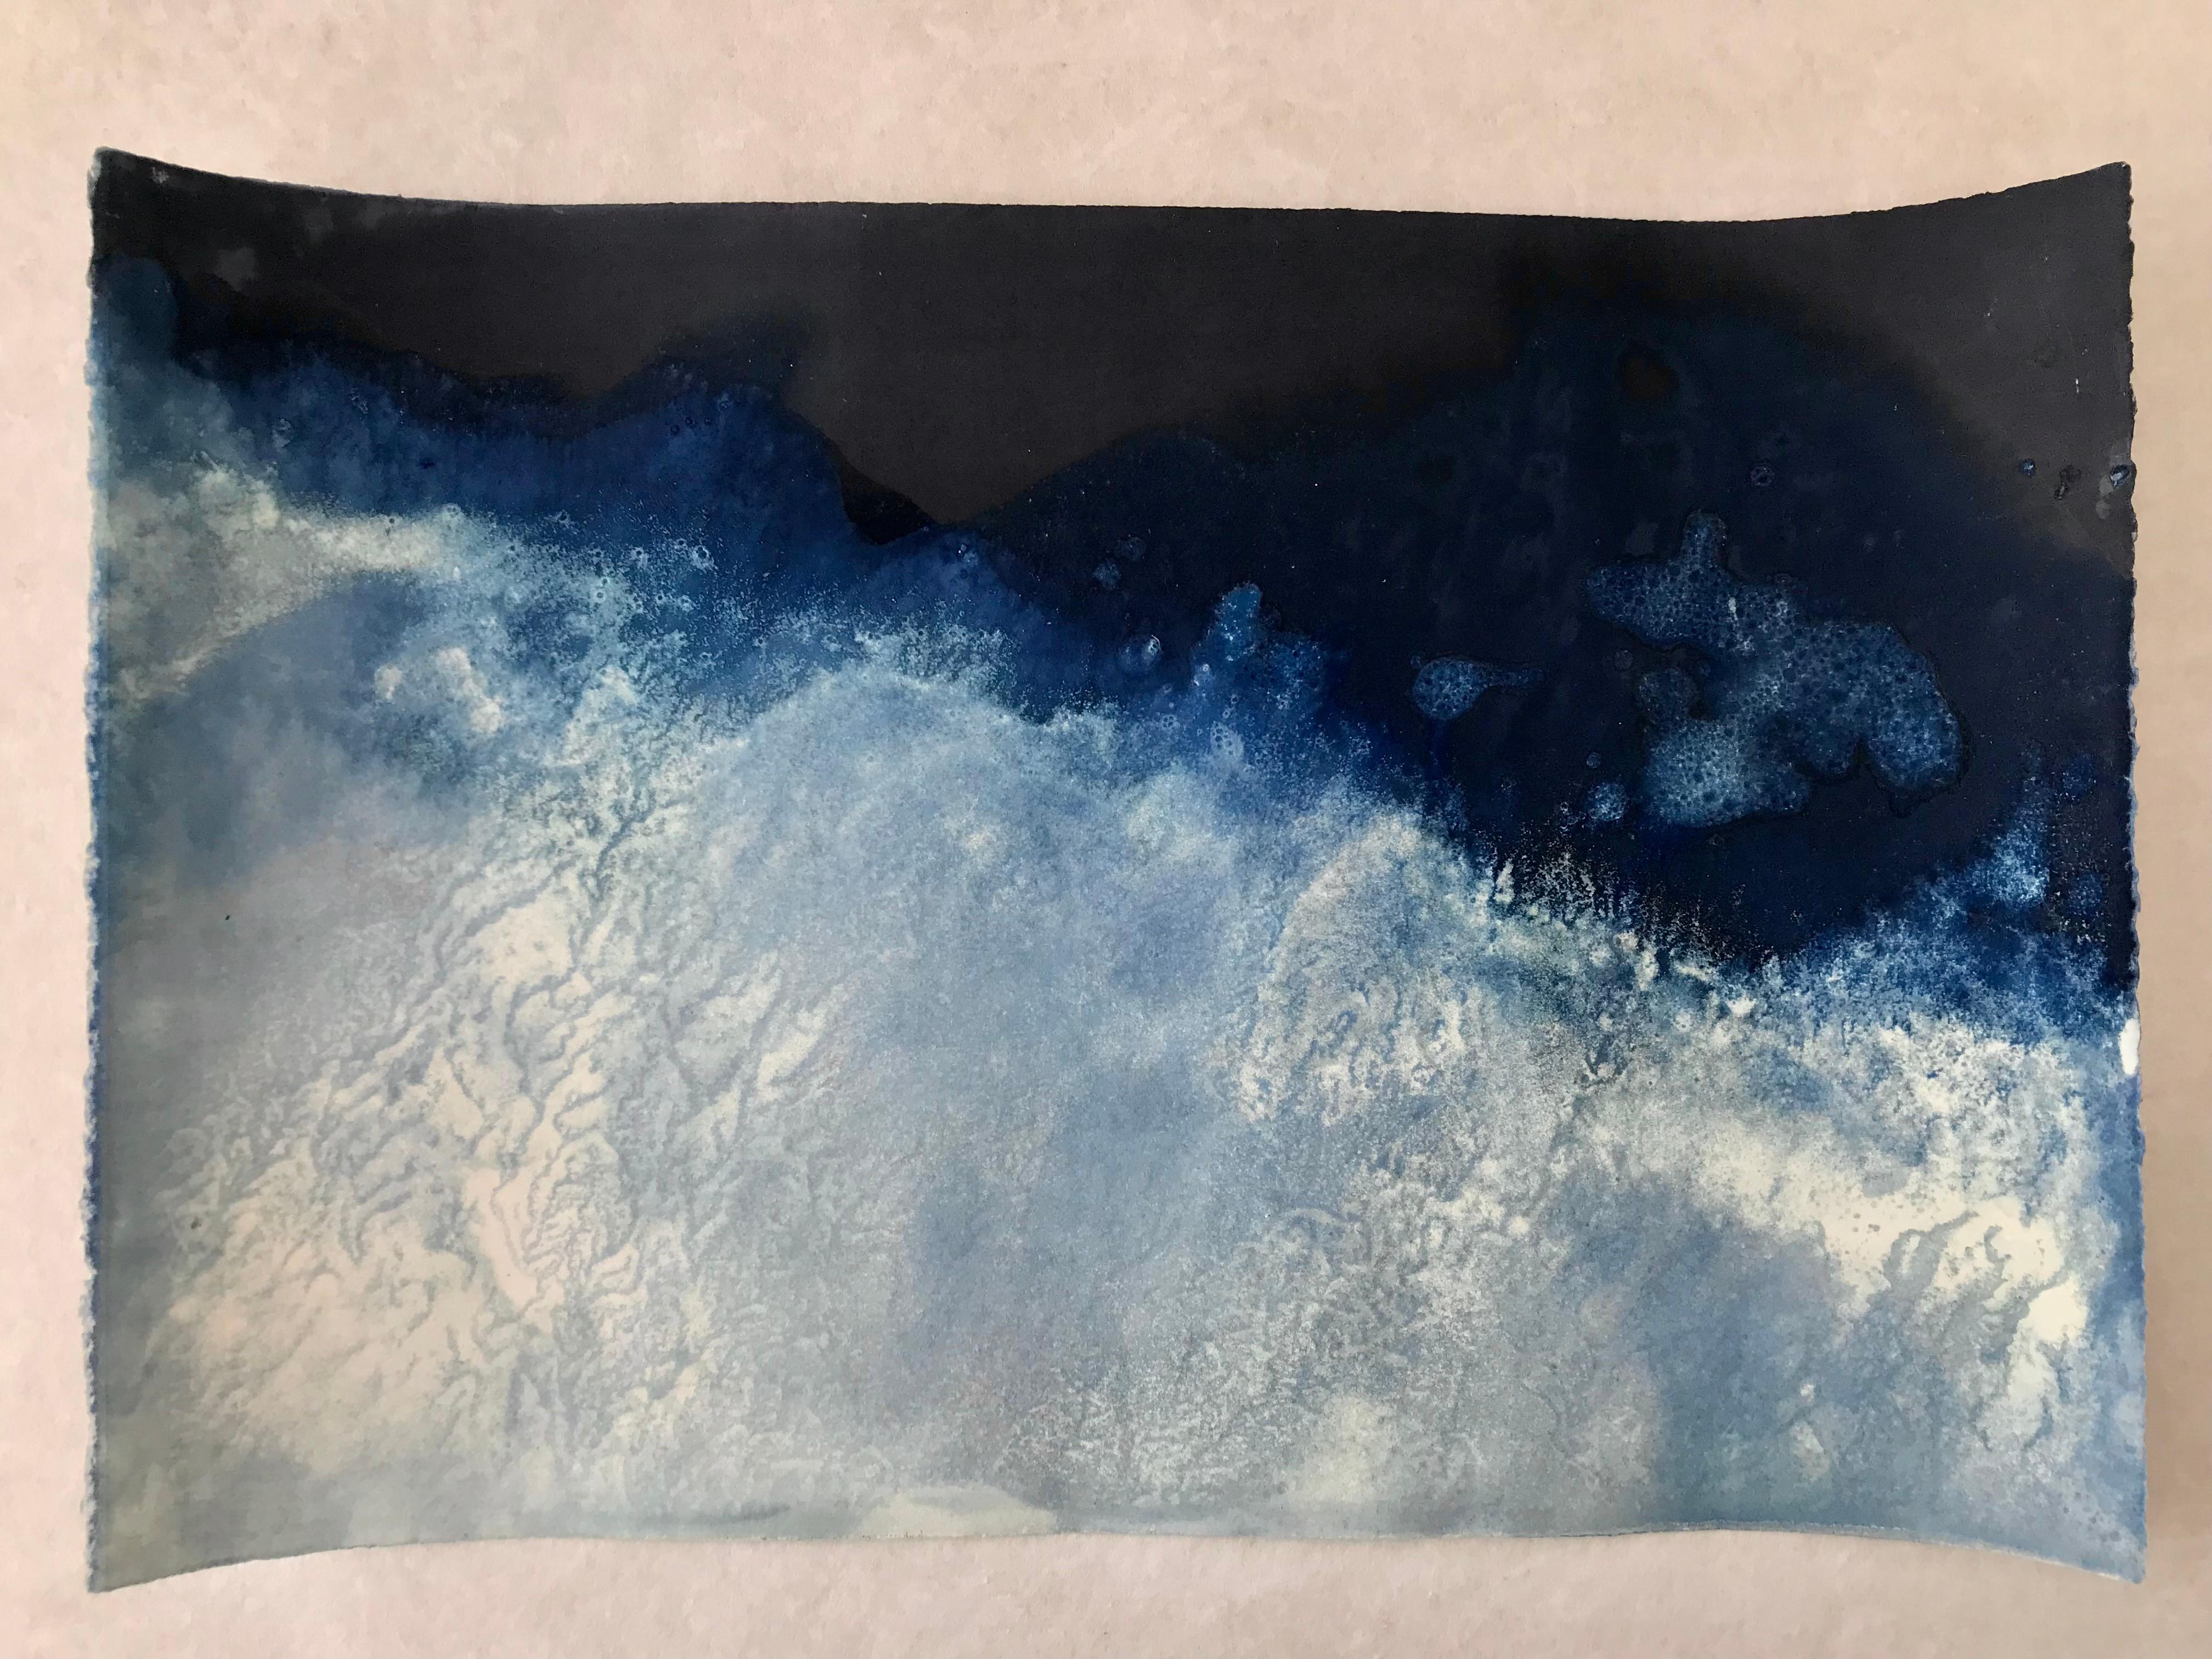 27° 42' 26.32'' N7° 42' 26.32'' W-4. Cyanotype photograph of the ocean waves - Photograph by Paola Davila